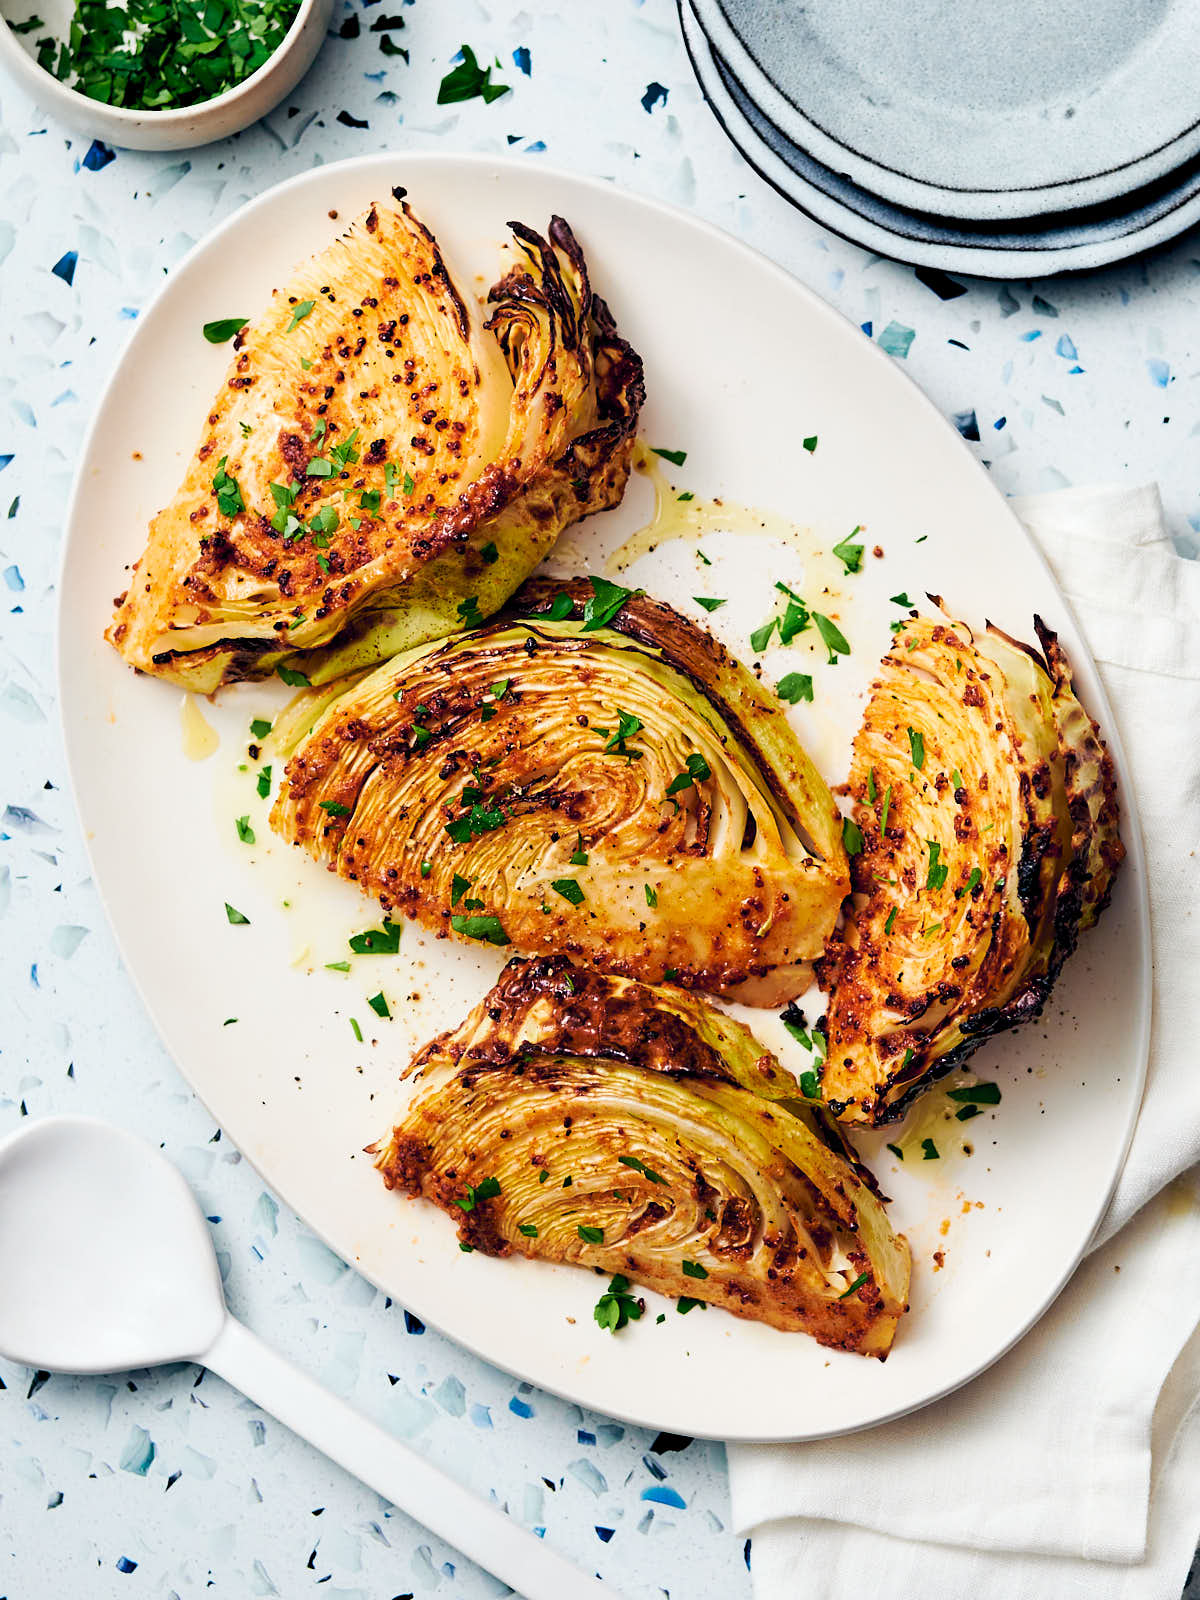 Wedges of air fryer cabbage wedges on a serving platter.